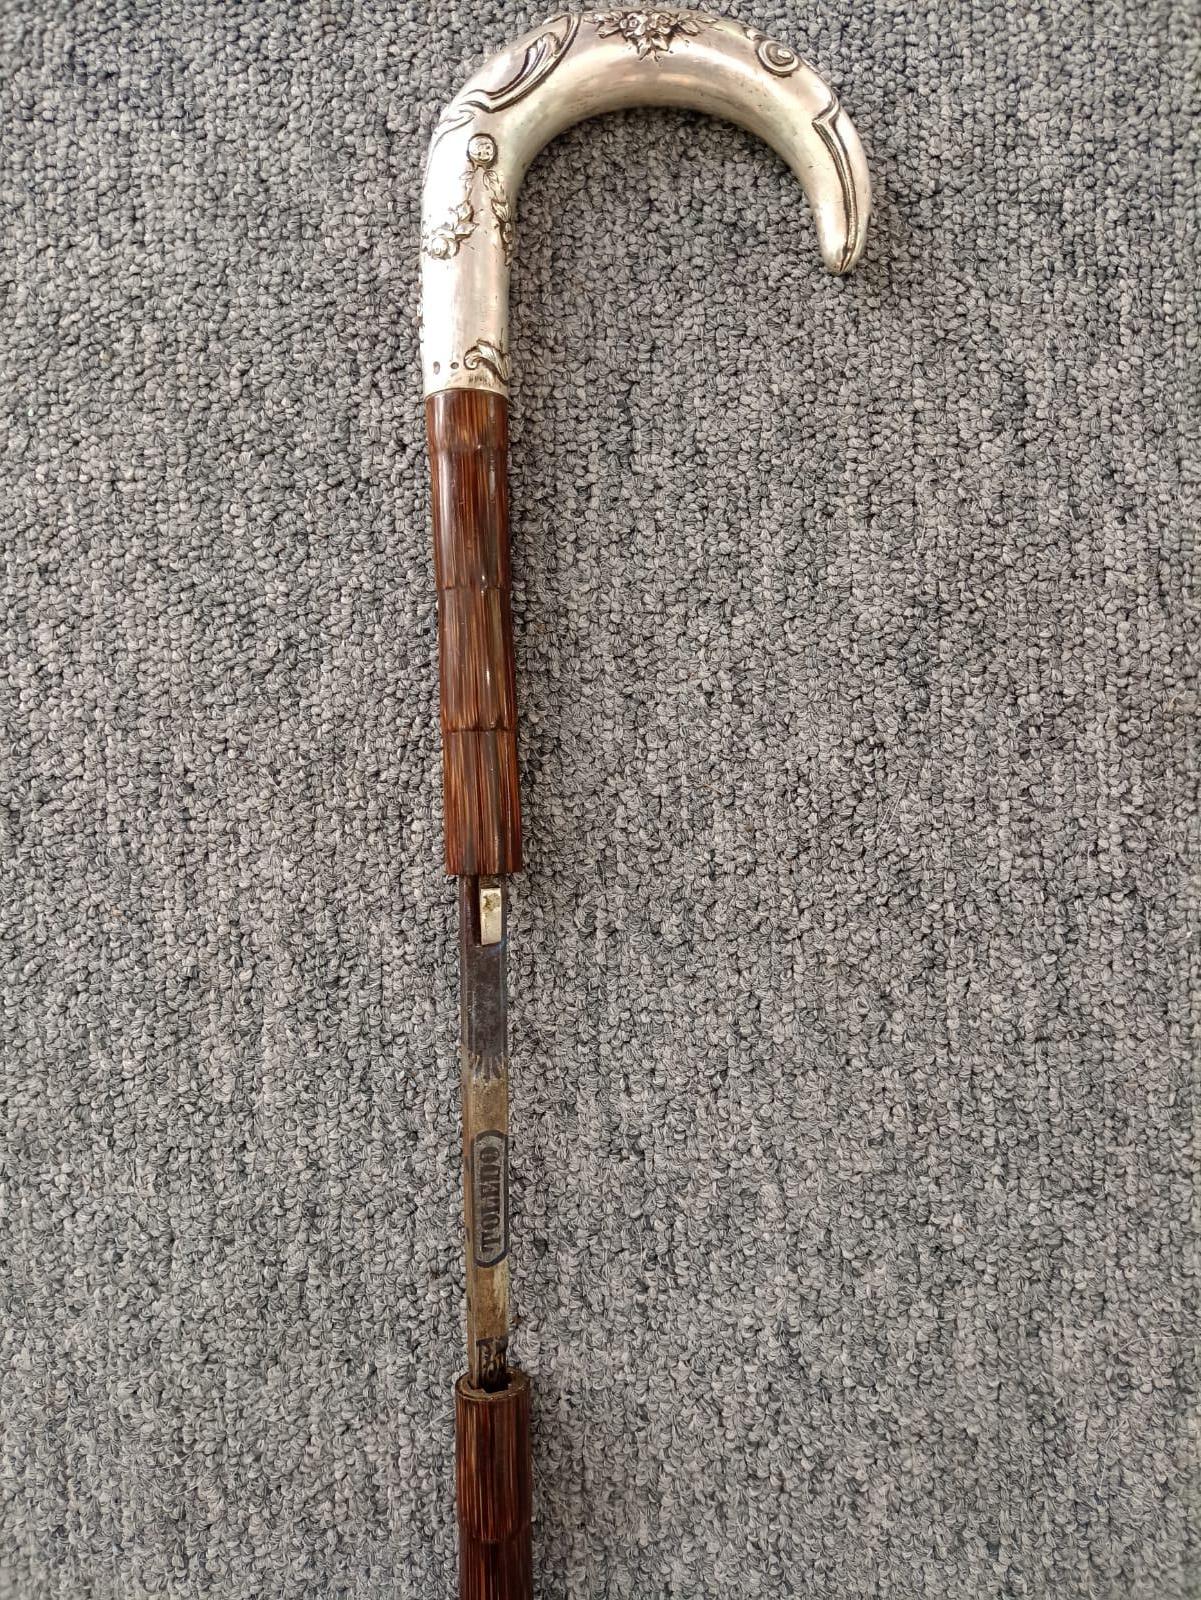 Cane sword Spain old 1900
Foil type unsharpened sword
Engraved Steel Sword Toledo ( Spain )
german silver hilt
The cane is made of Malacca cane
Circa 1900 Origin Germany
perfect condition
no restorations
alpaca toe